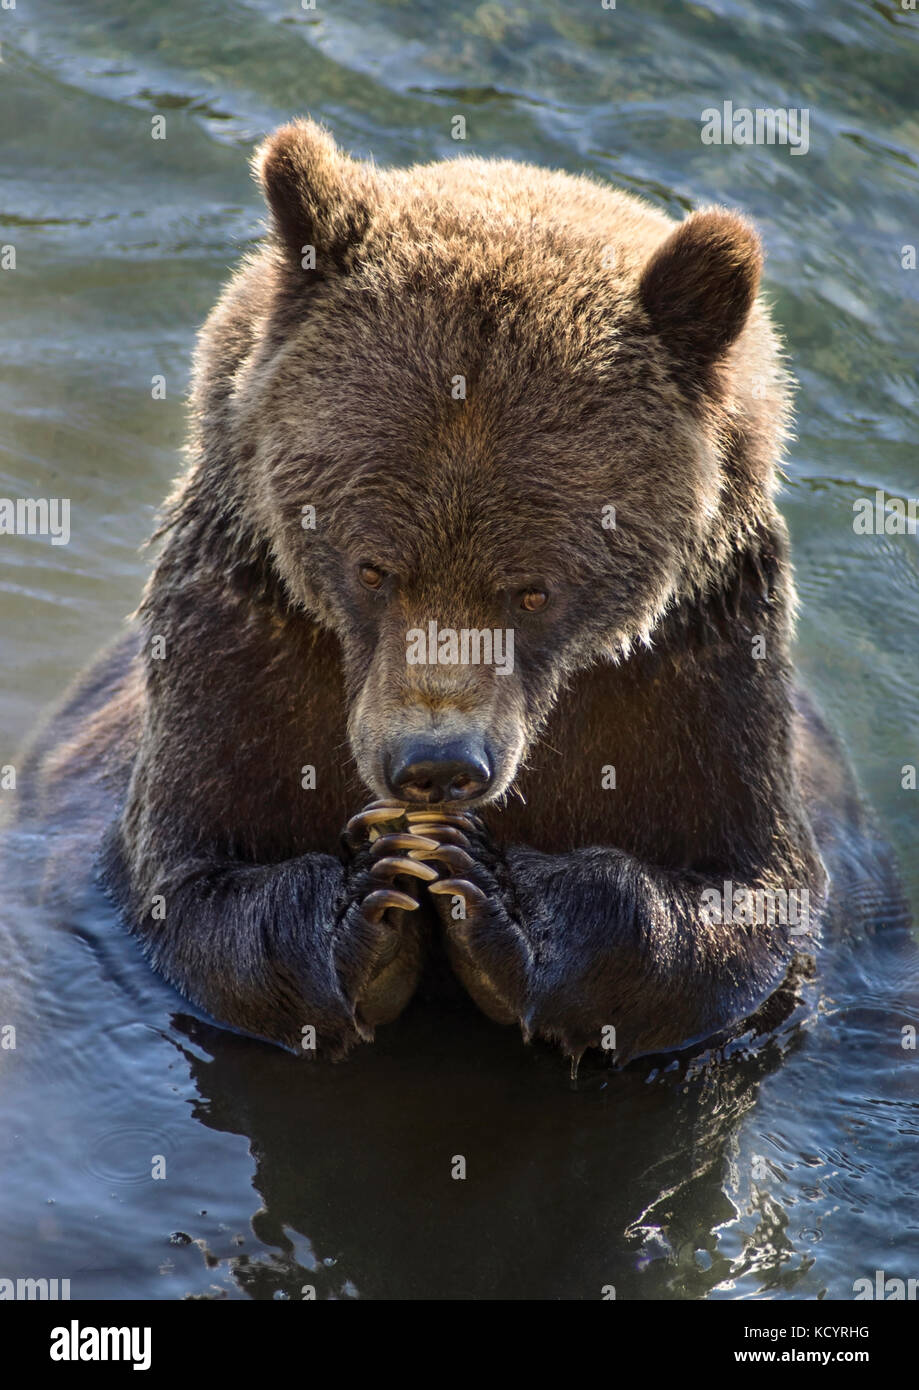 Grizzly Bear (Ursus arctos horribilis), Adult, Fall, Autumn, in water of salmon stream, comical paw position, Central British Columbia, Canada Stock Photo